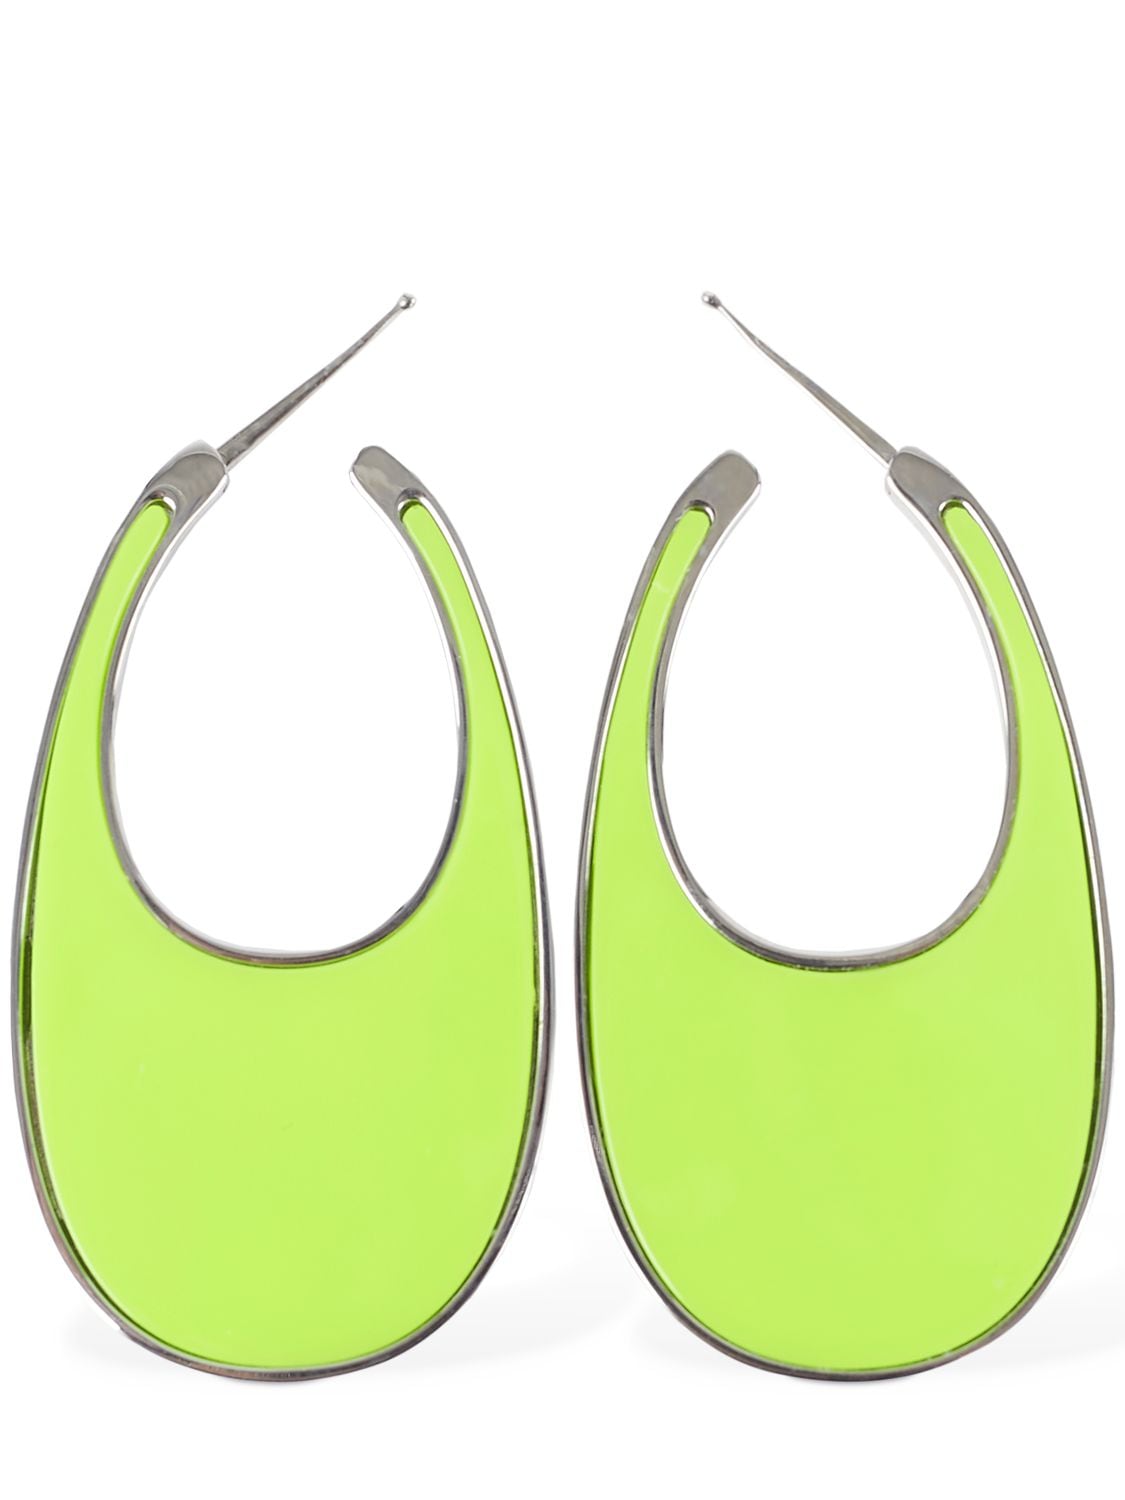 Image of Large Lacquered Swipe Earrings